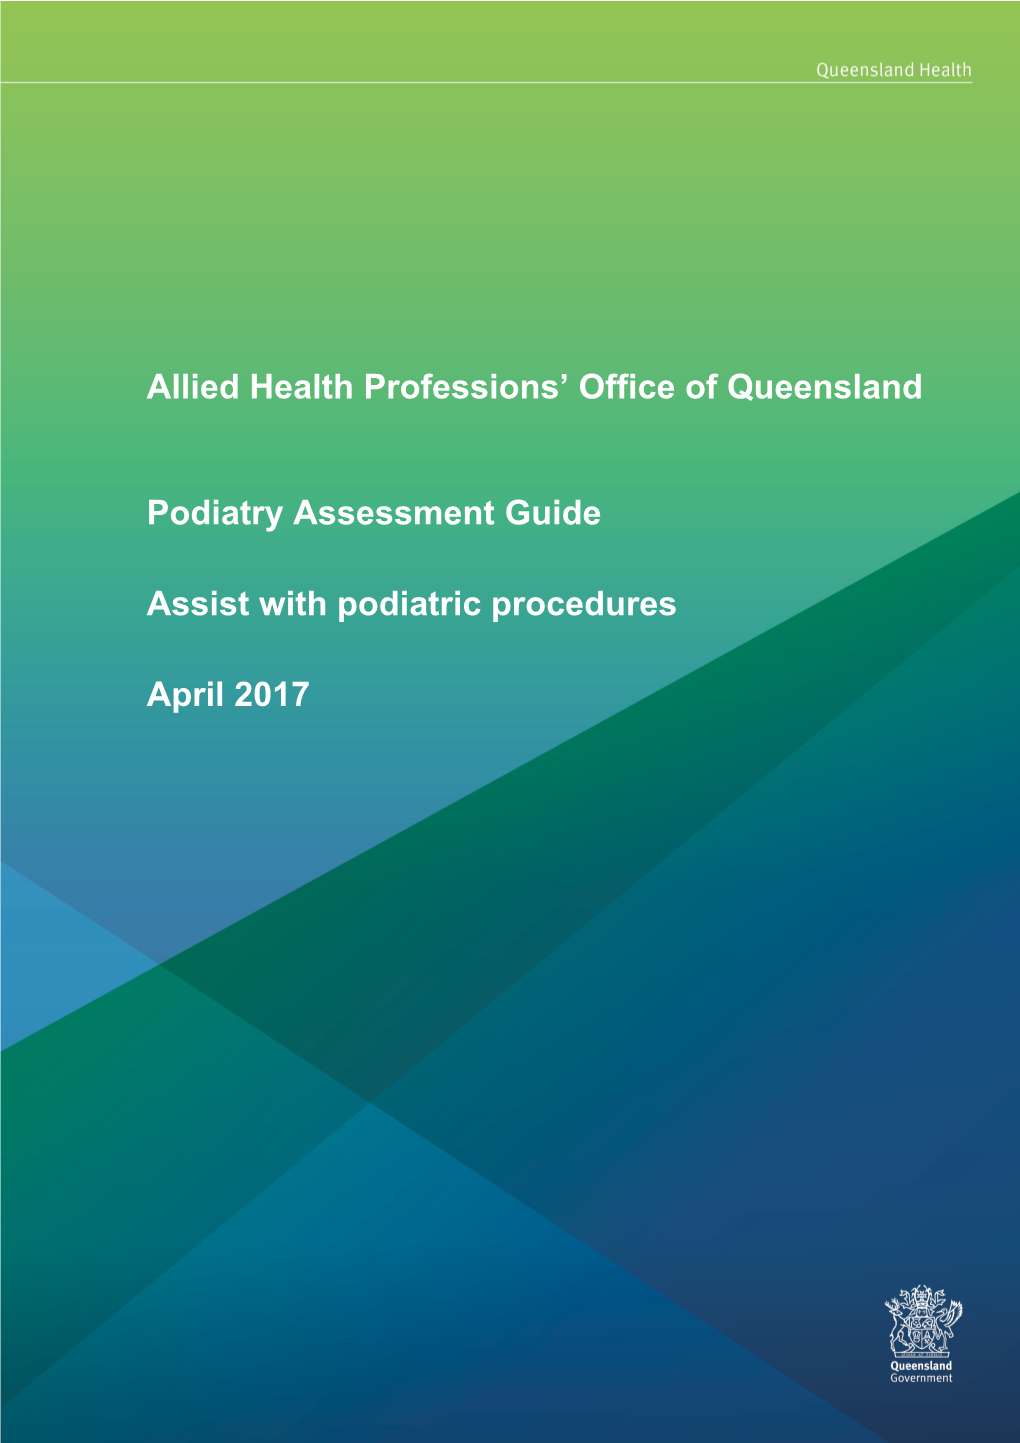 Podiatry Assessment Guide - Assist with Podiatric Procedures